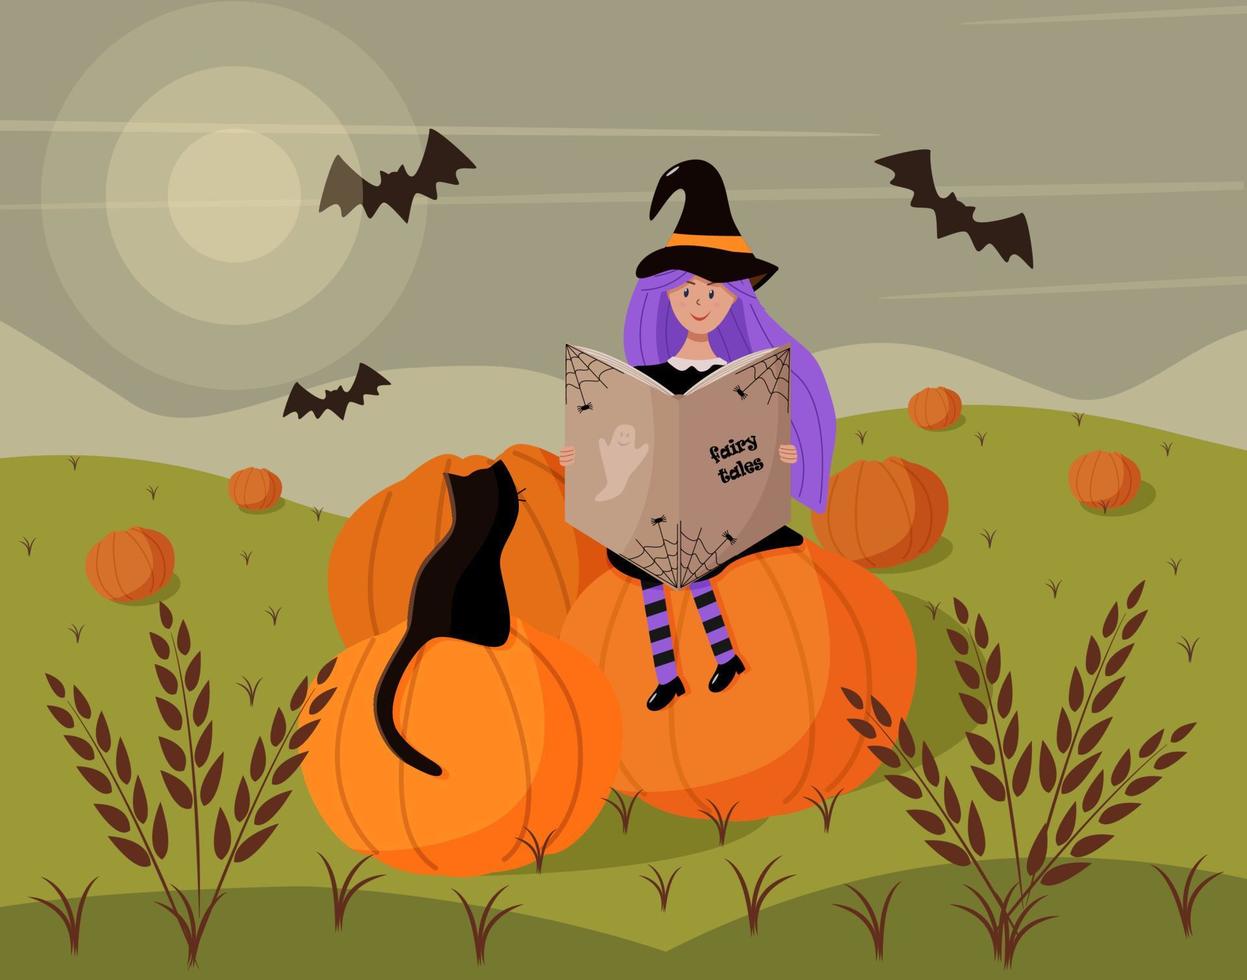 A girl in a witch costume is sitting on a pumpkin with a cat and a book. Halloween cartoon scene. Vector illustration of a wheat field with pumpkins and bats.